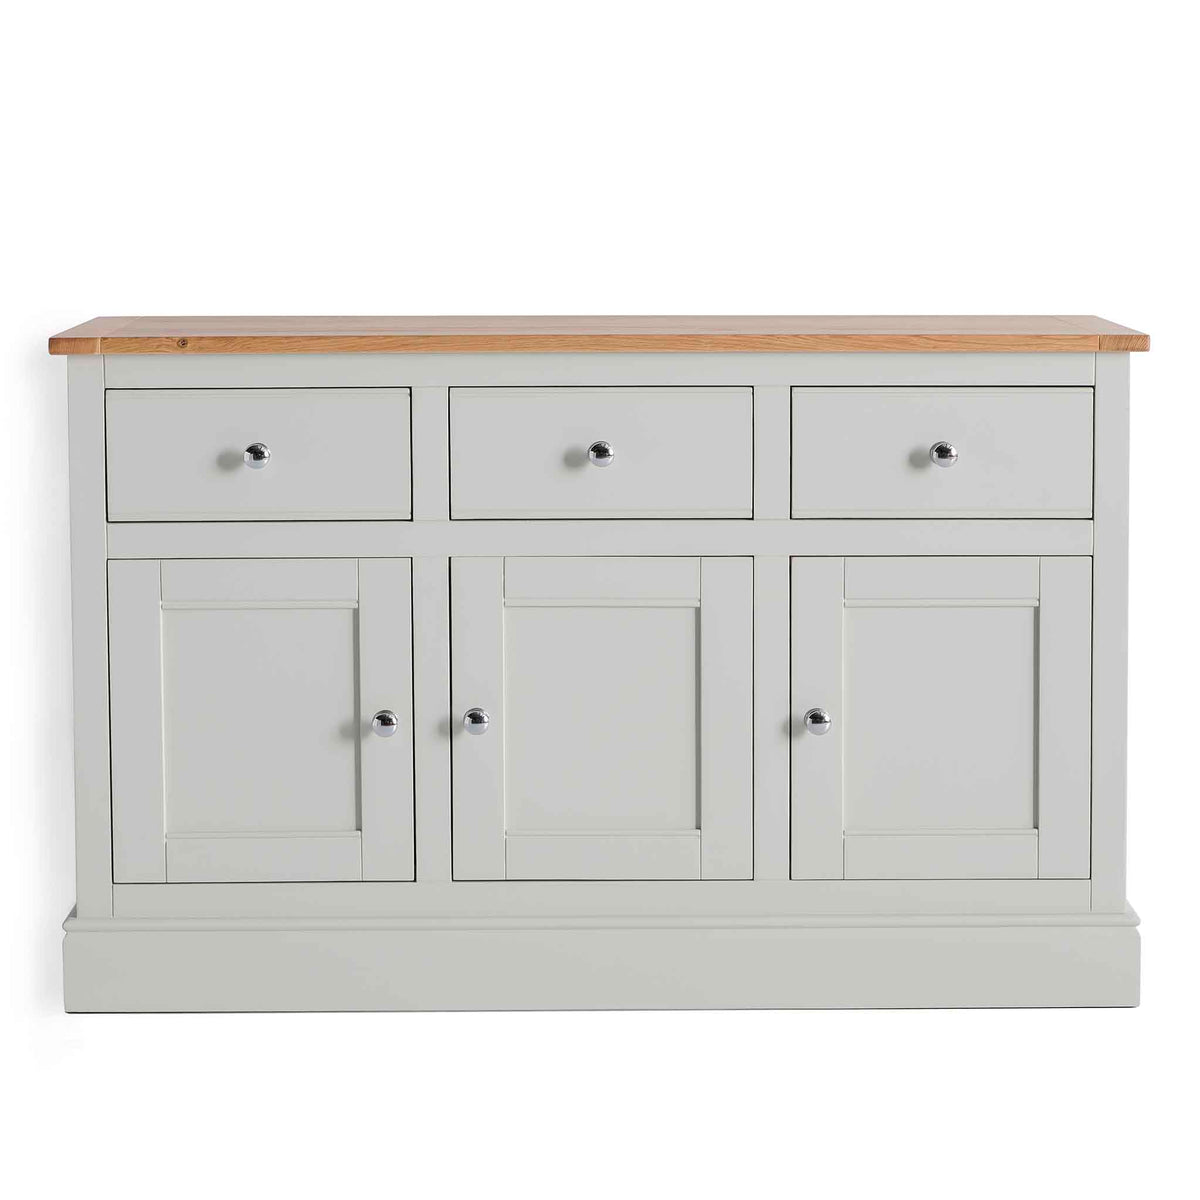 Chichester Ivory Large Sideboard - Front view